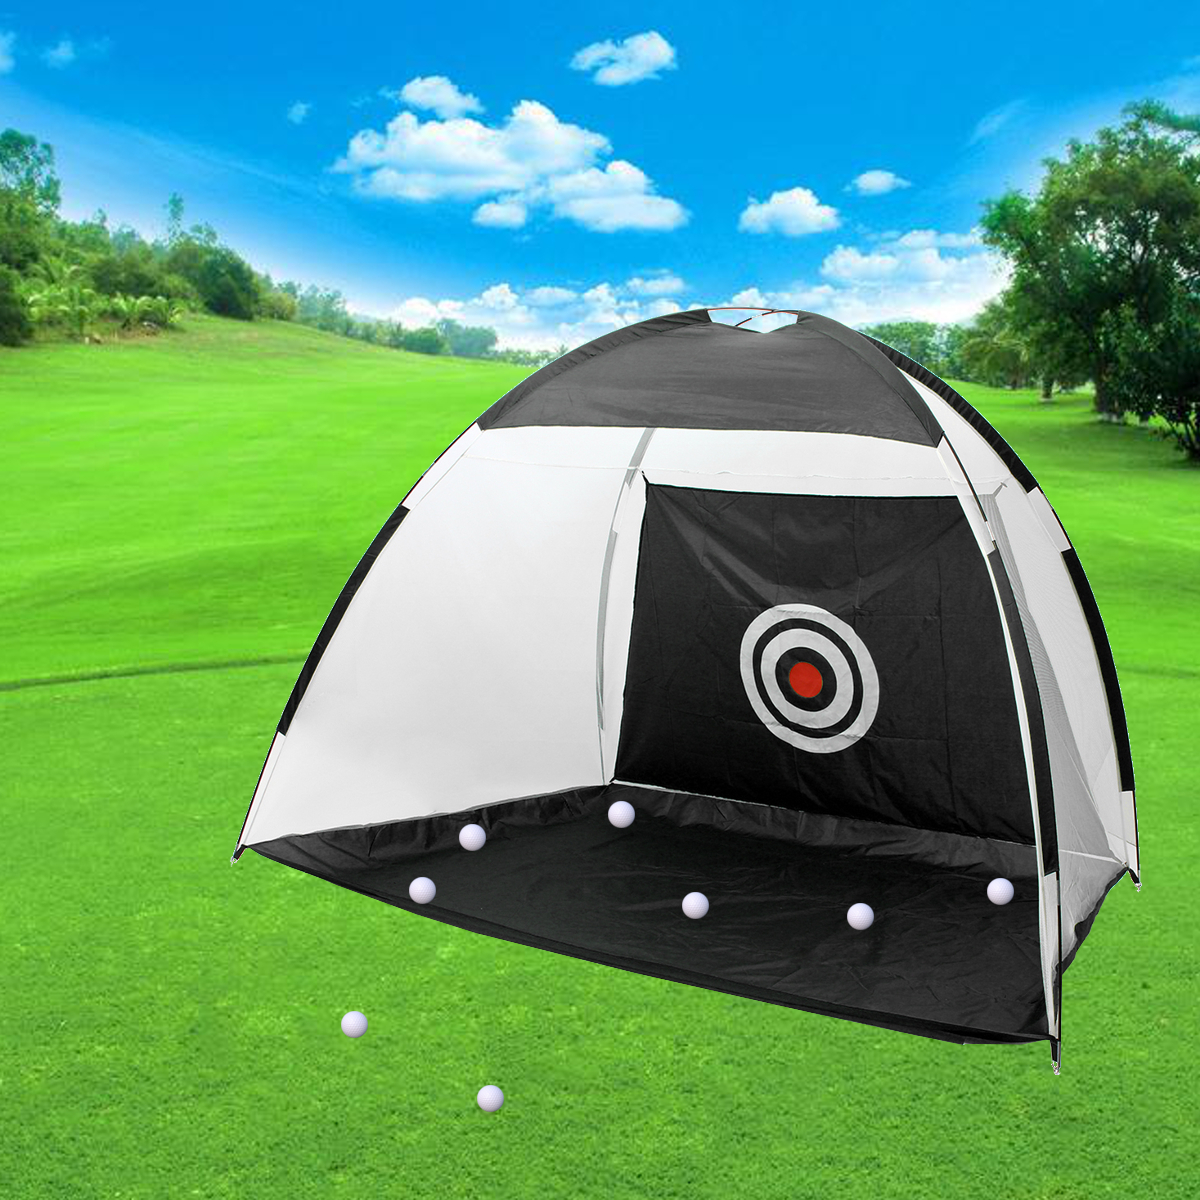 3M-Golf-Training-Net-Portable-Foldable-Practice-Golf-Chipping-Net-Hitting-Cage-Trainer-Indoor-Outdoo-1709126-15